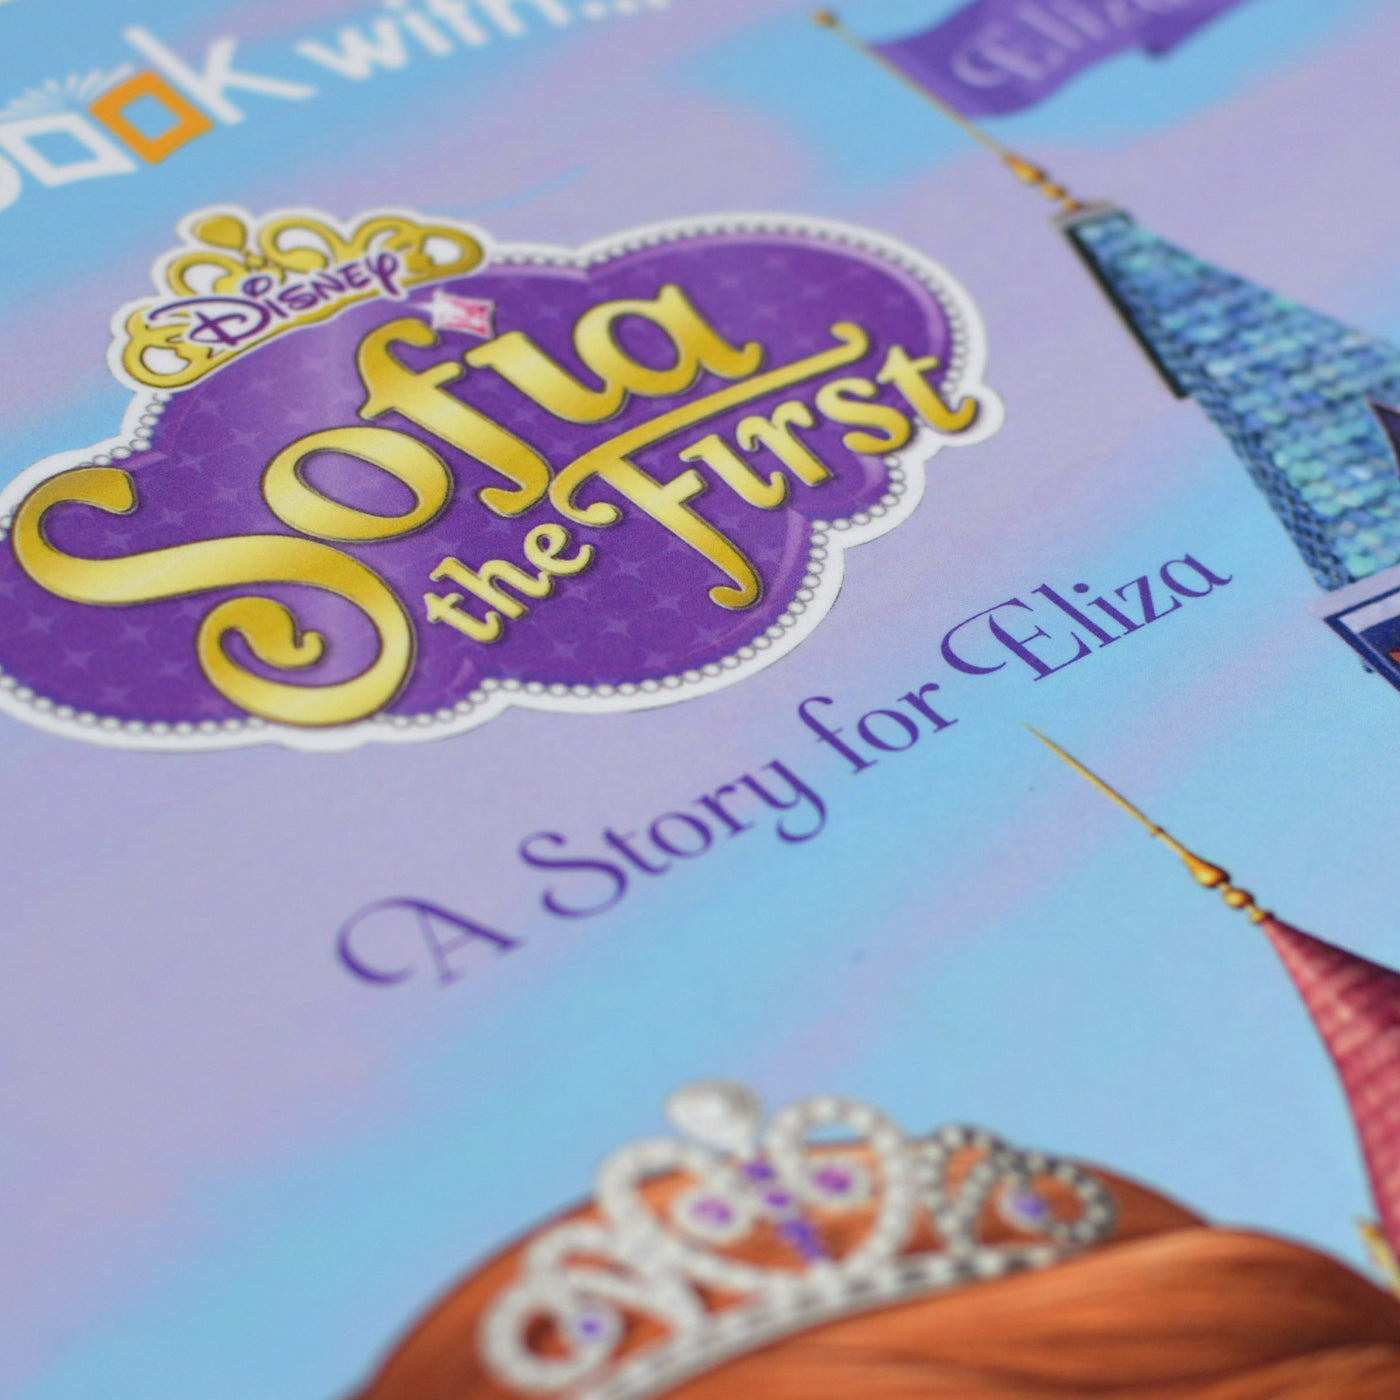 Personalised Disney Jr Sofia the First Story Book - Shop Personalised Gifts